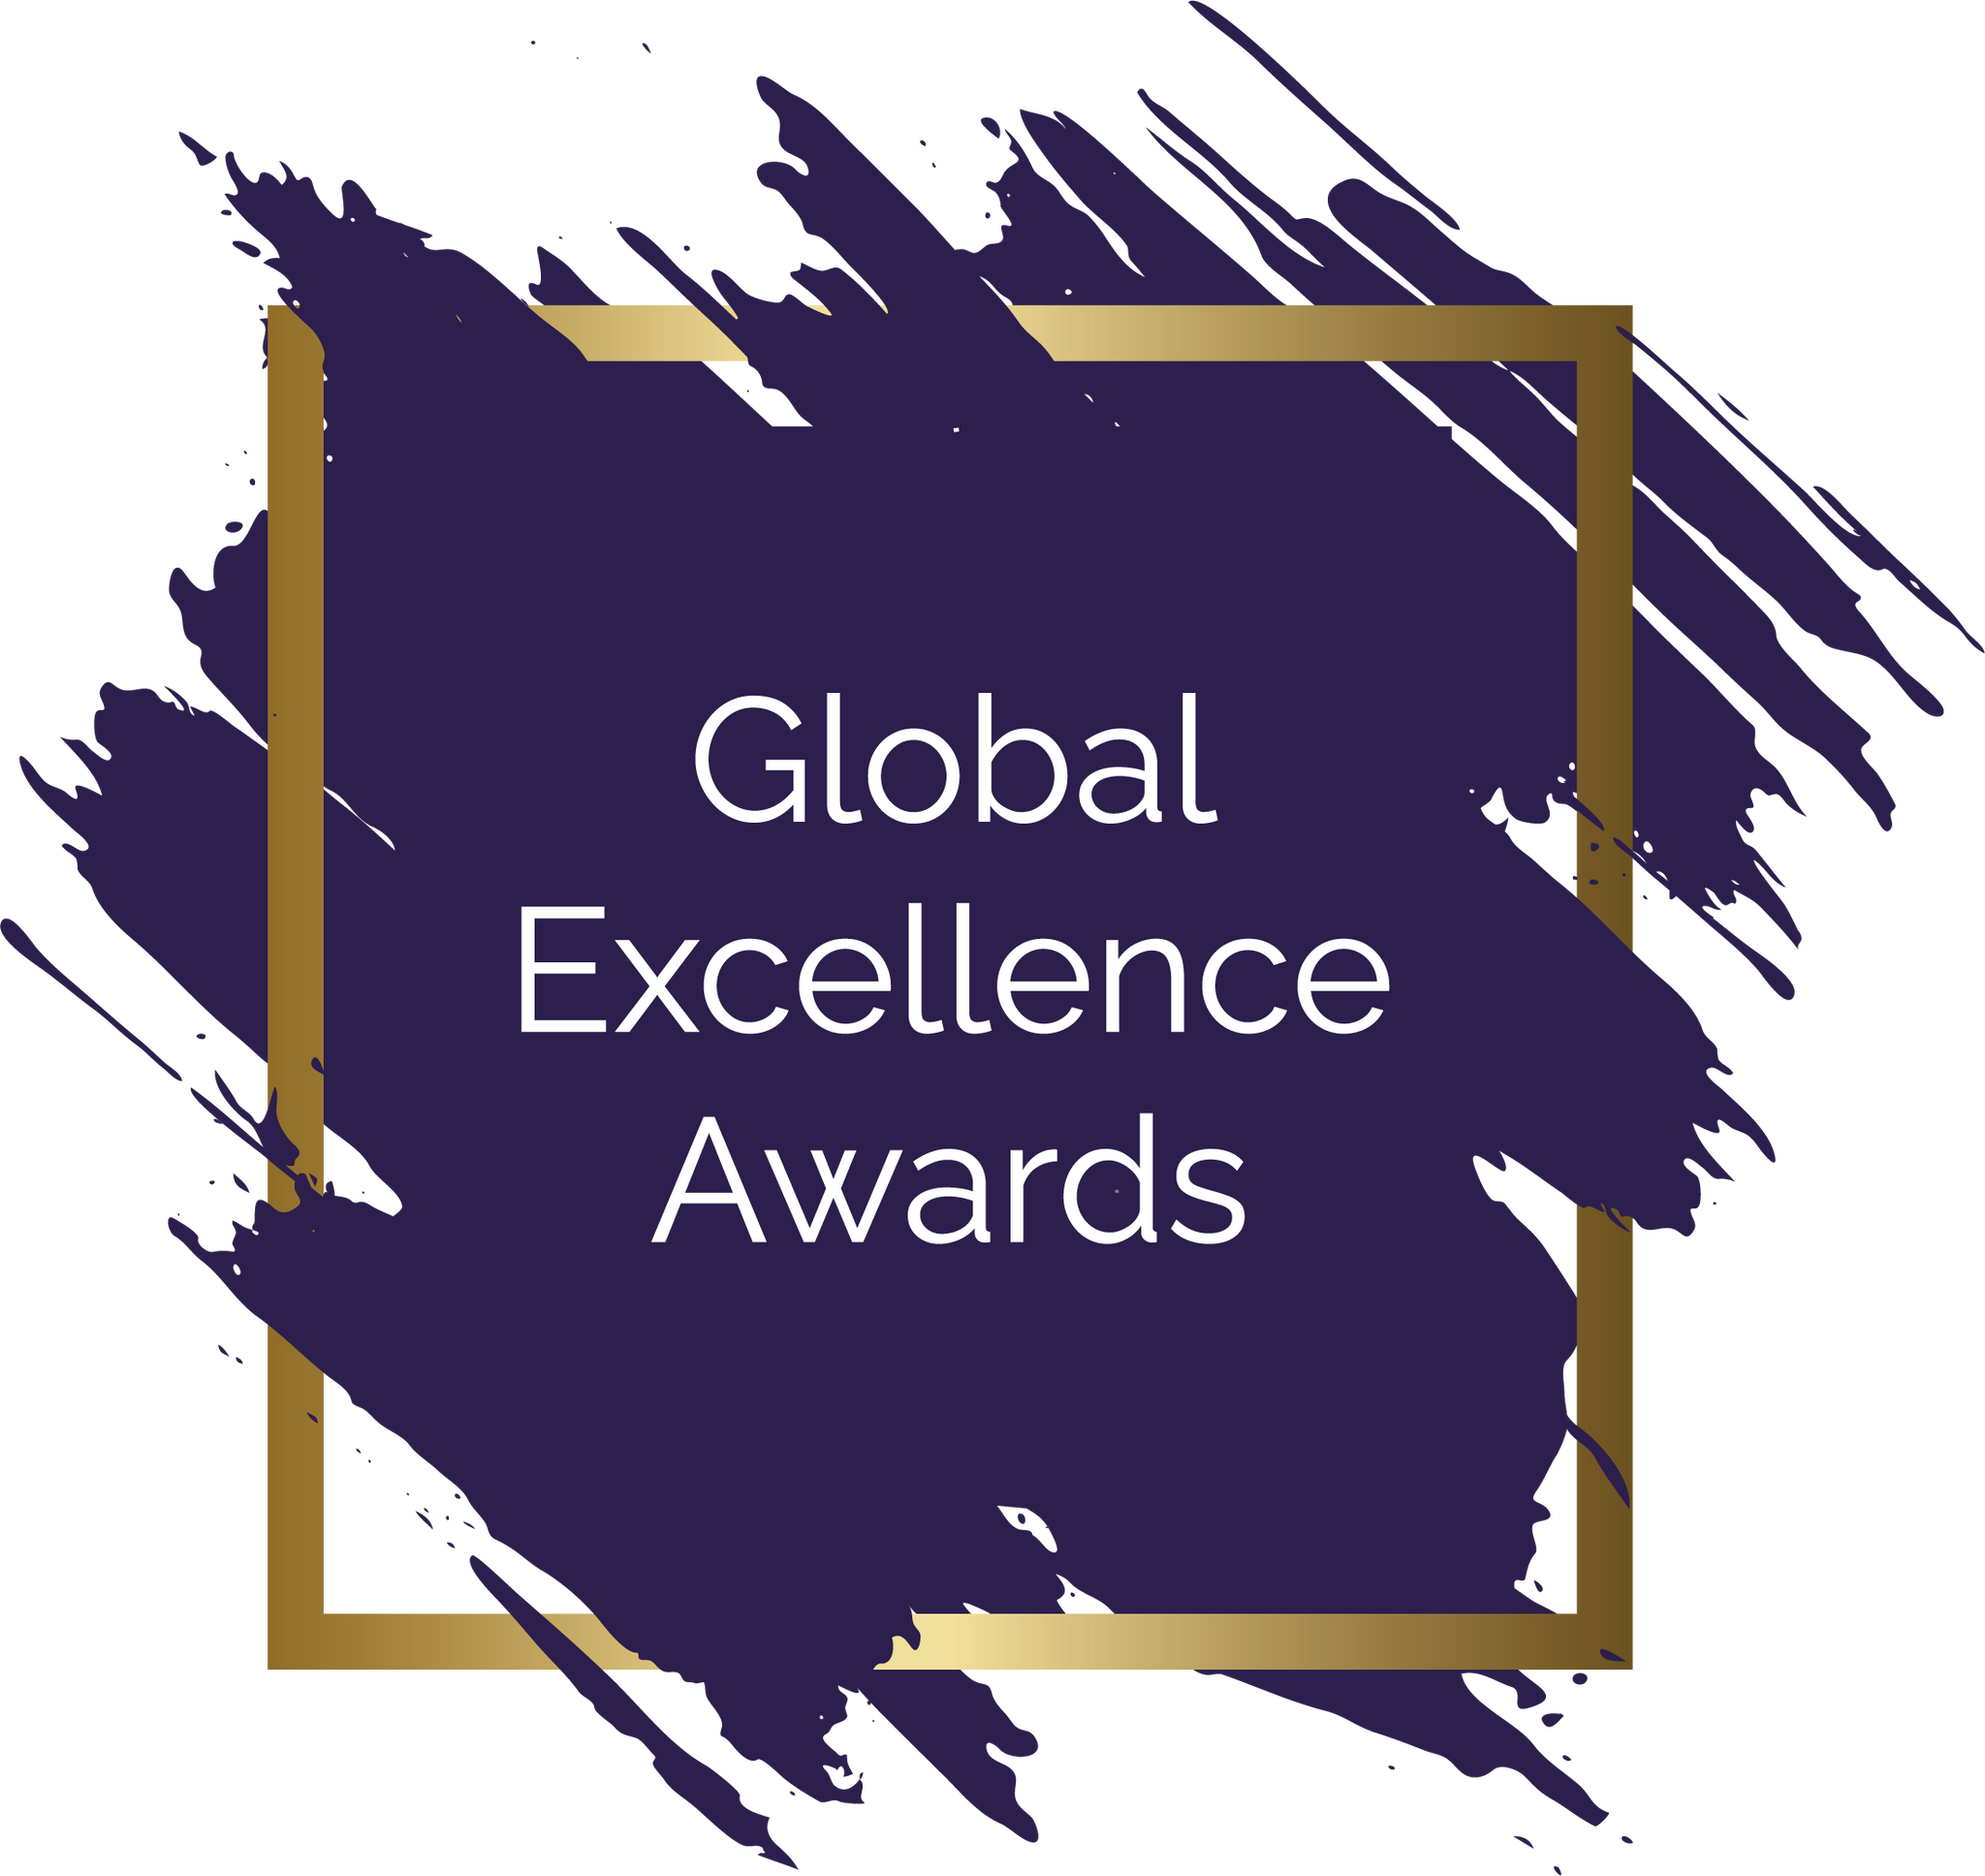 Global Excellence Award: "Best Sustainable Jewellery Business Denmark"